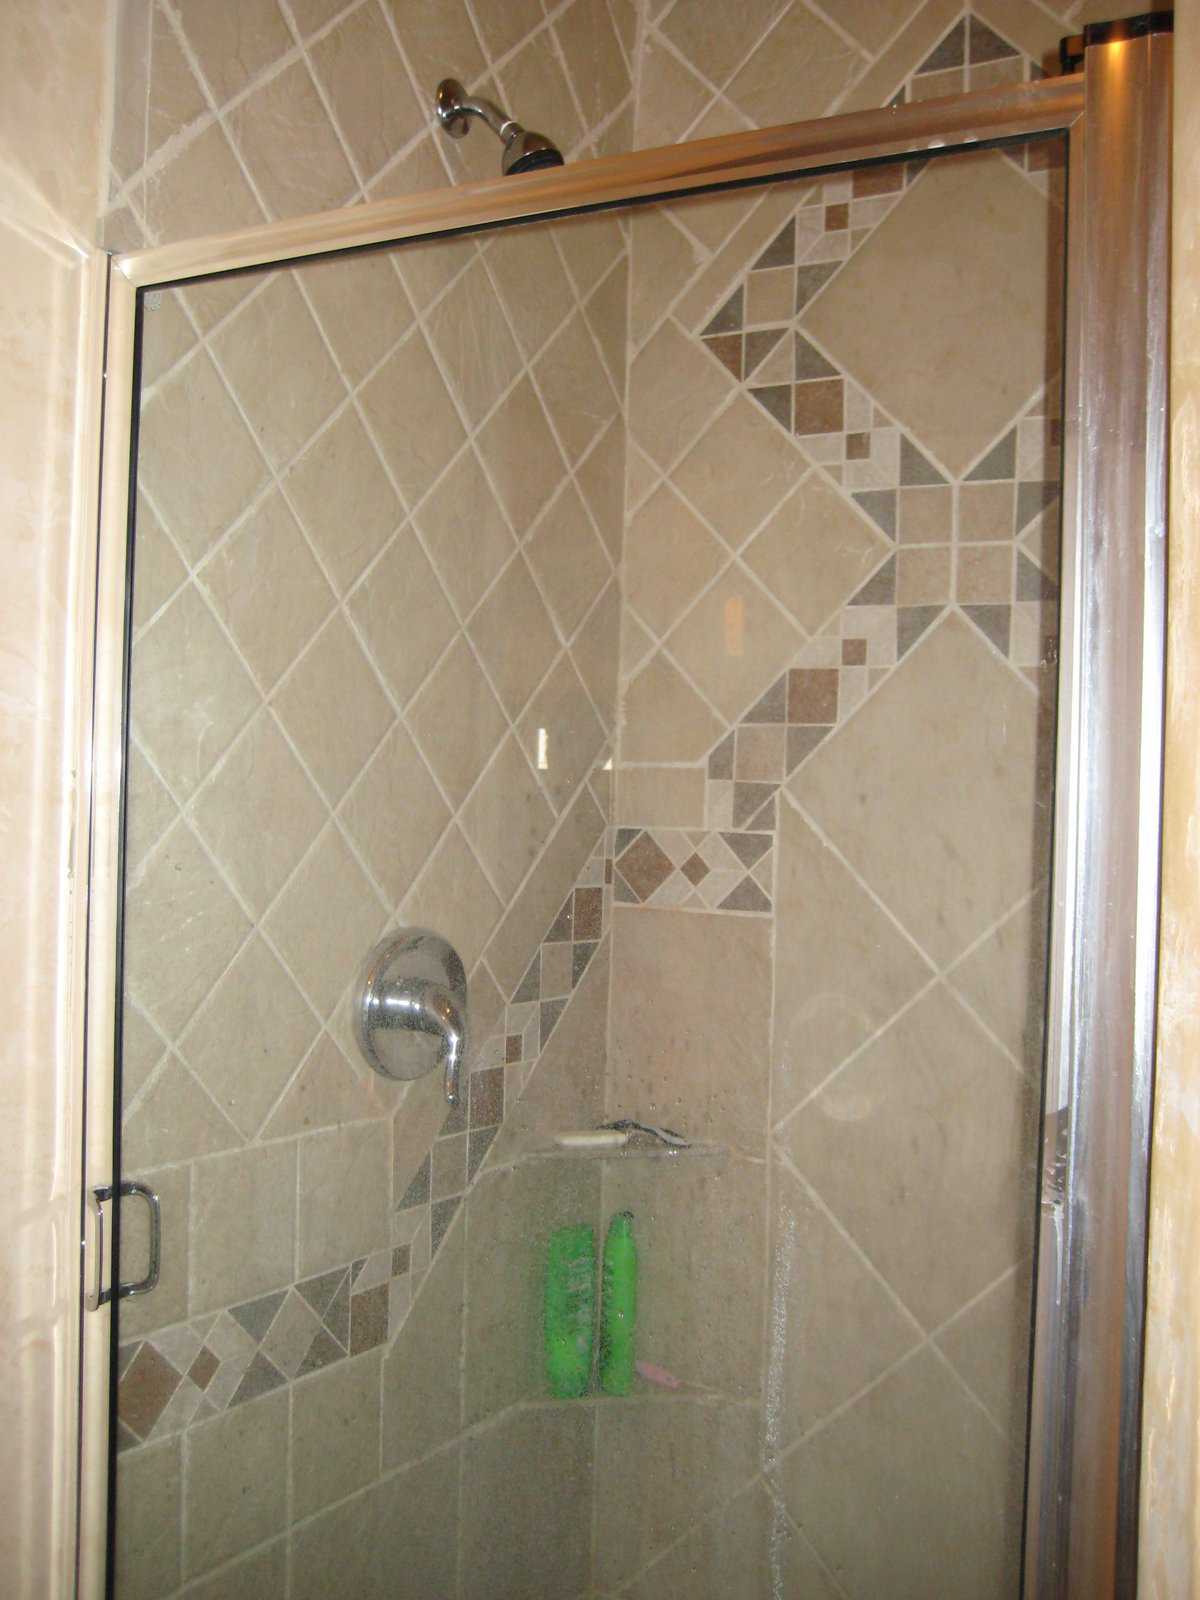 Intricate tile work — Walls with tiles of various colors and sizes form ornate patterns and enclose this shower.